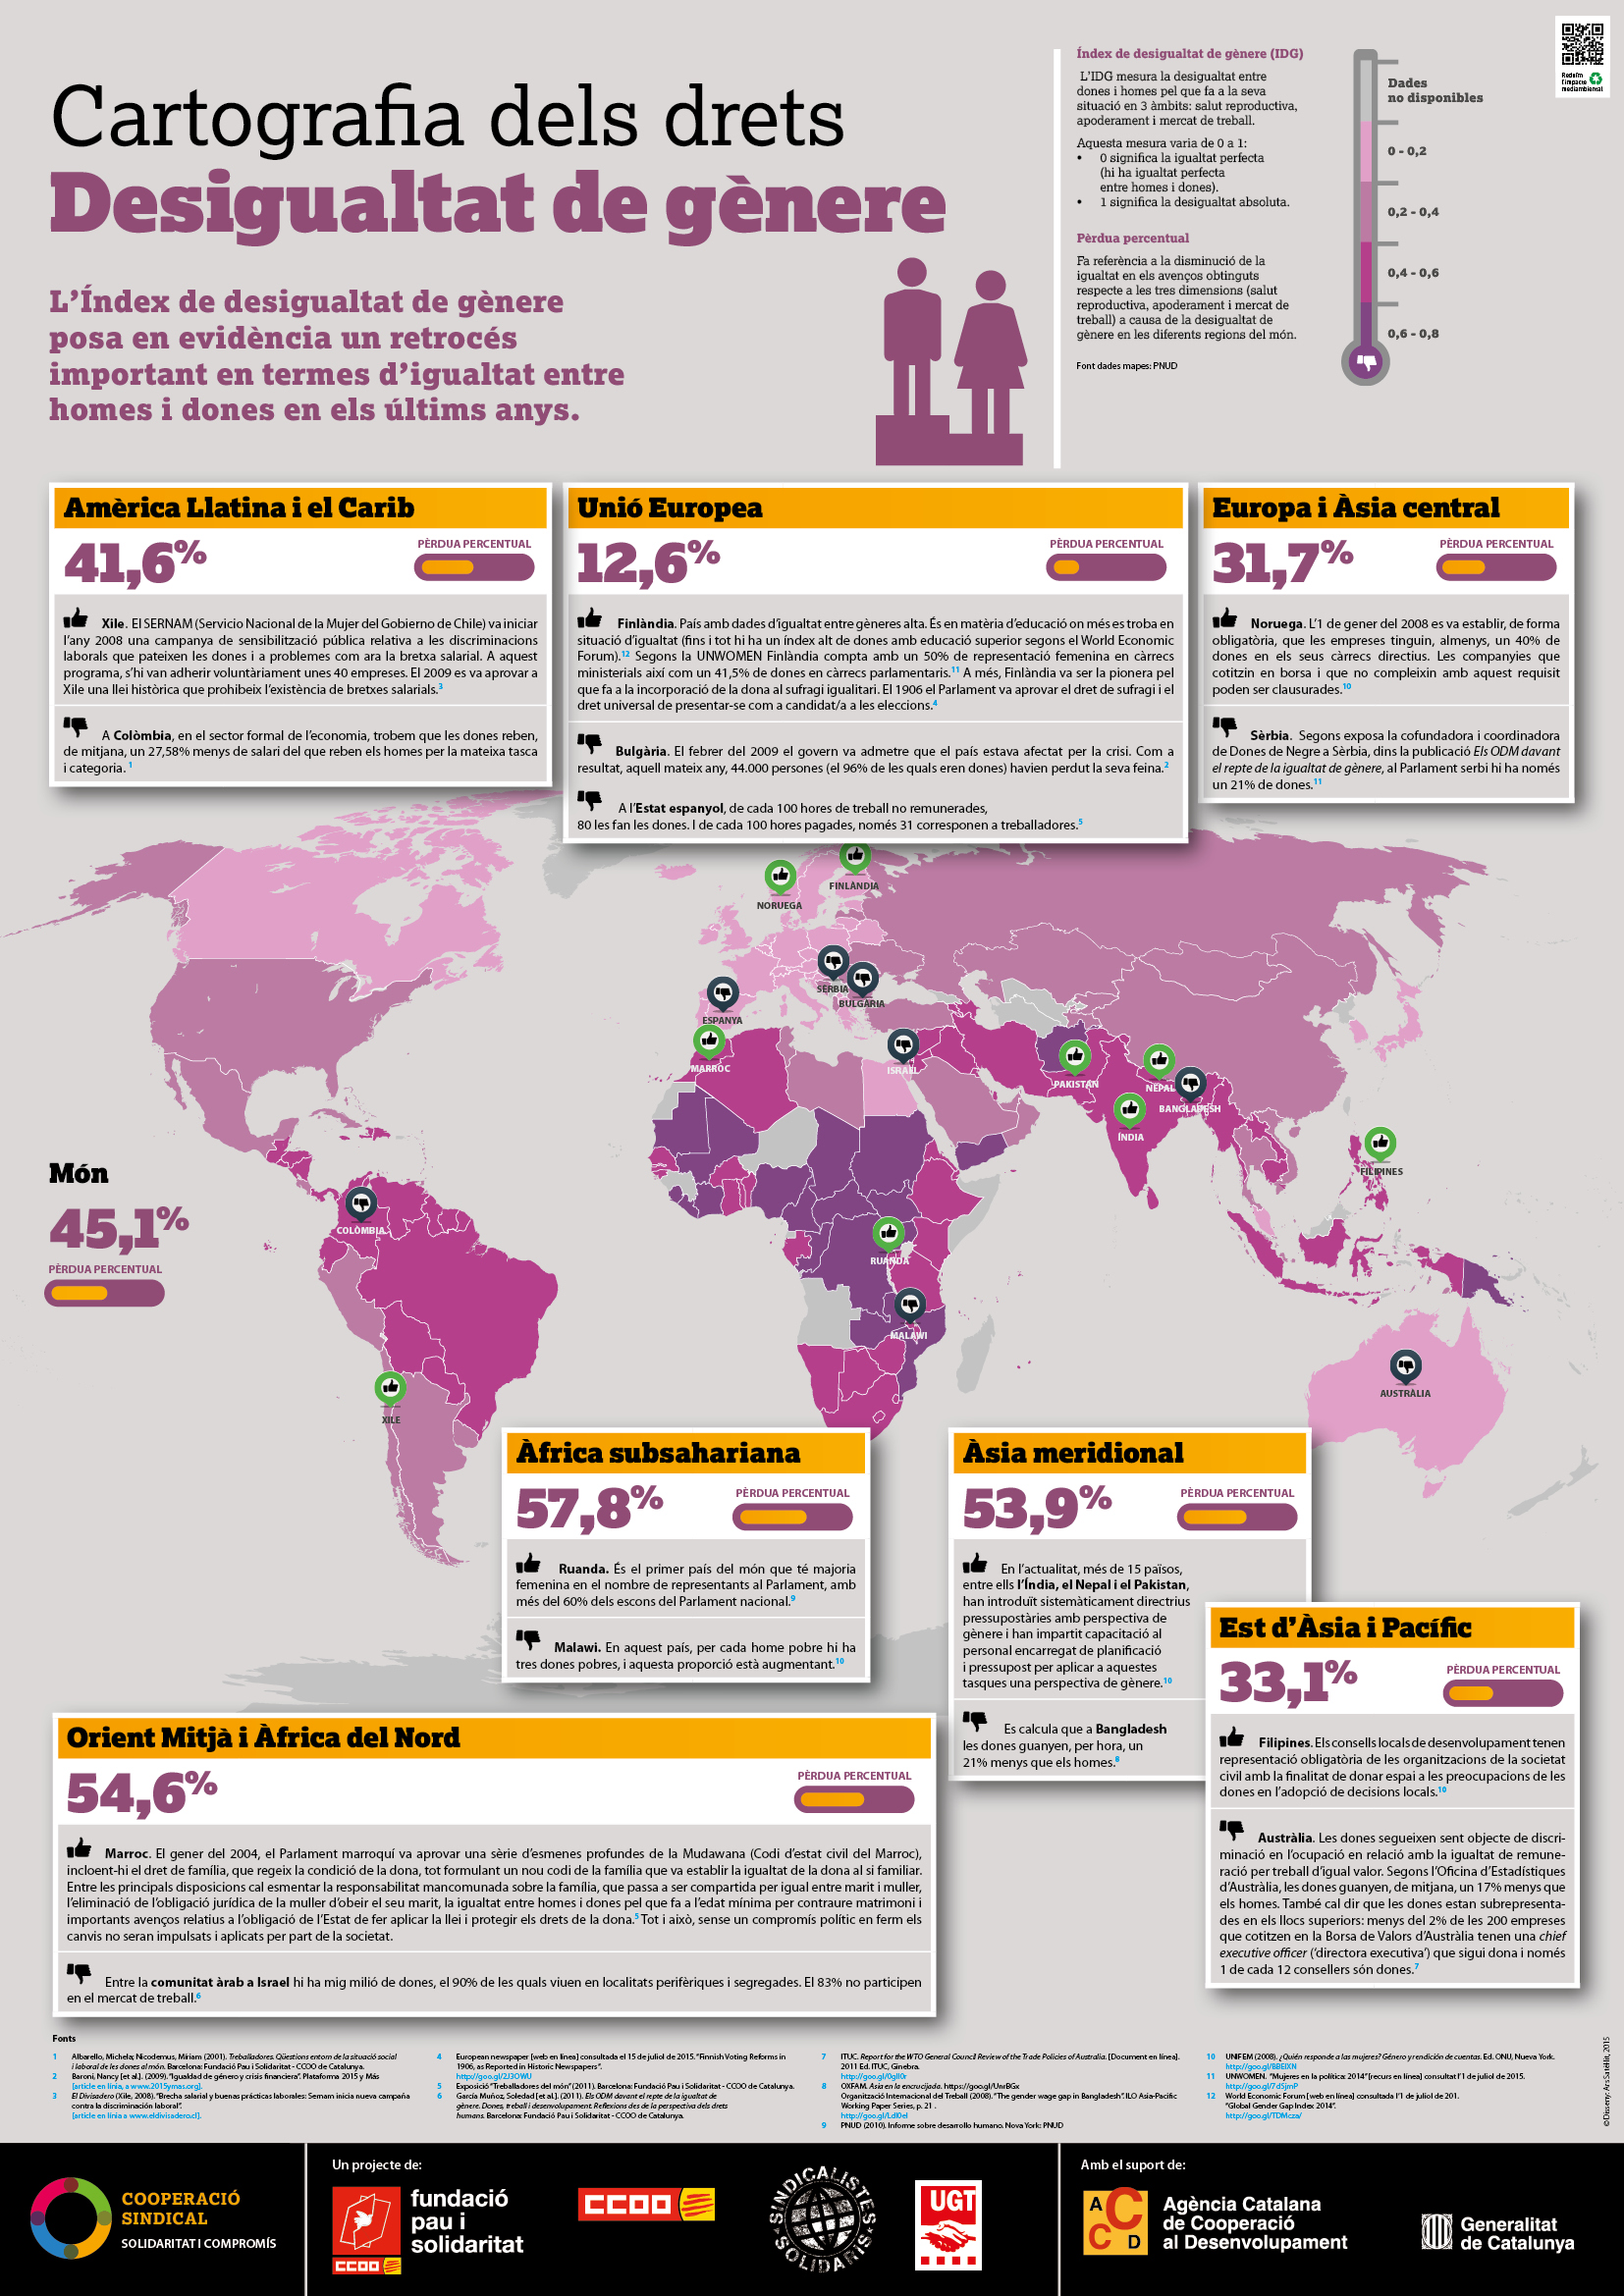 Cartography of rights. Gender inequality